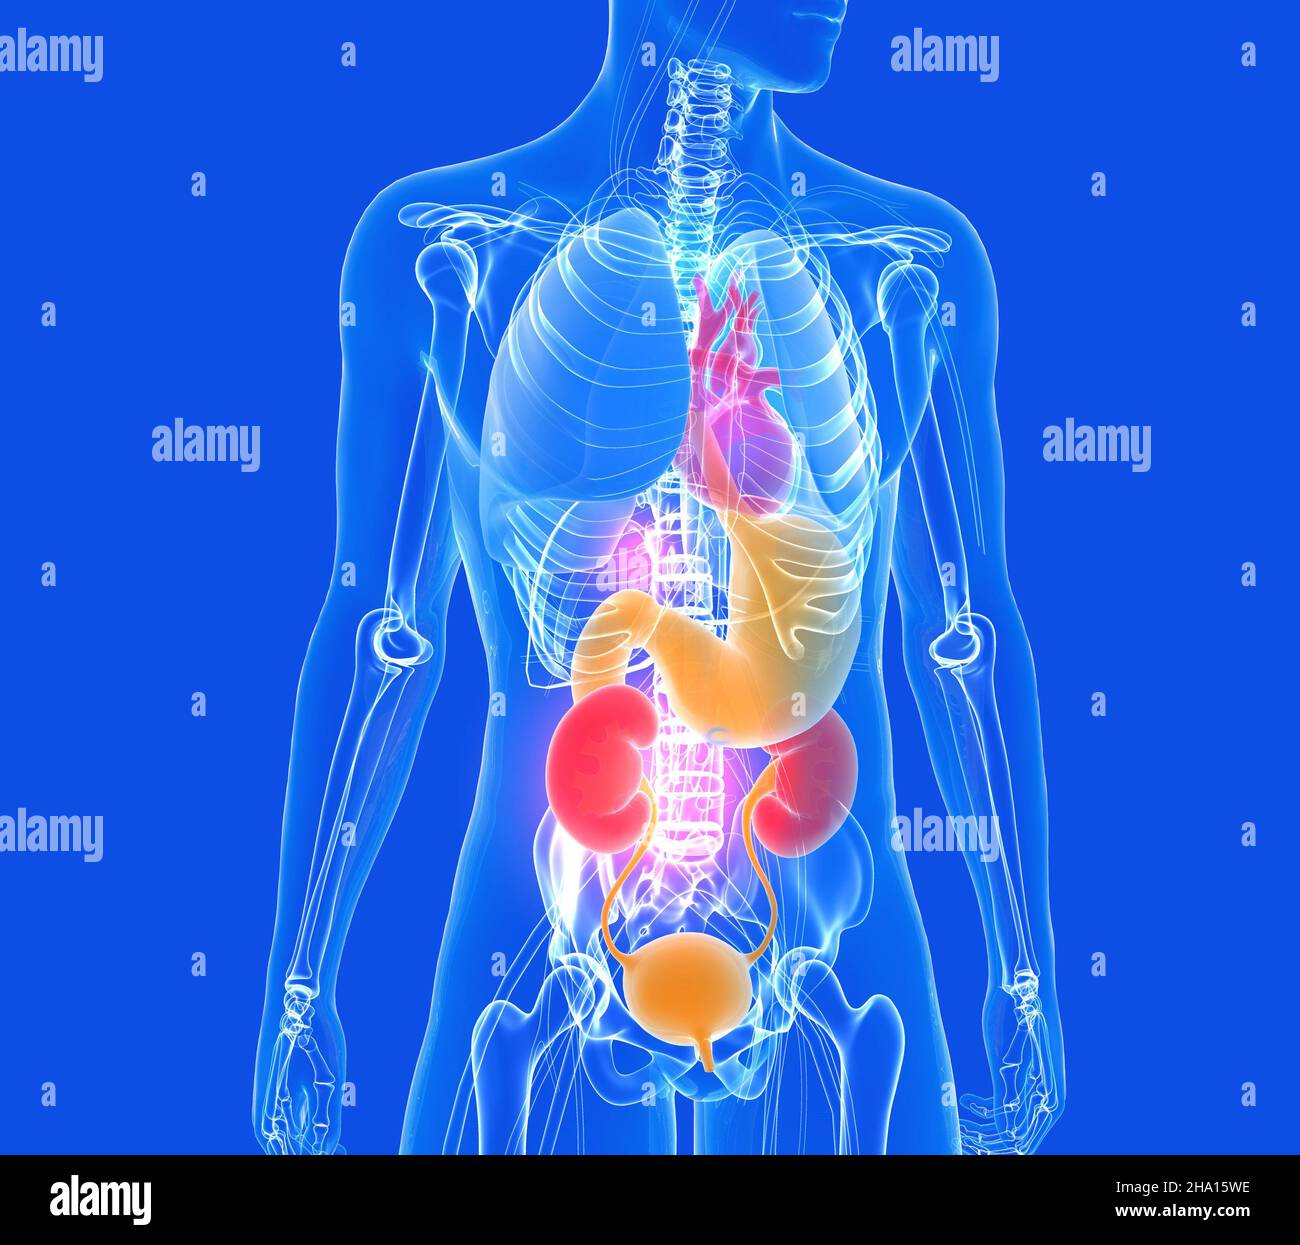 Anatomical 3d illustration of the human body made of transparent glass.  Showing the internal organs with luminous colors. on blue background Stock  Photo - Alamy